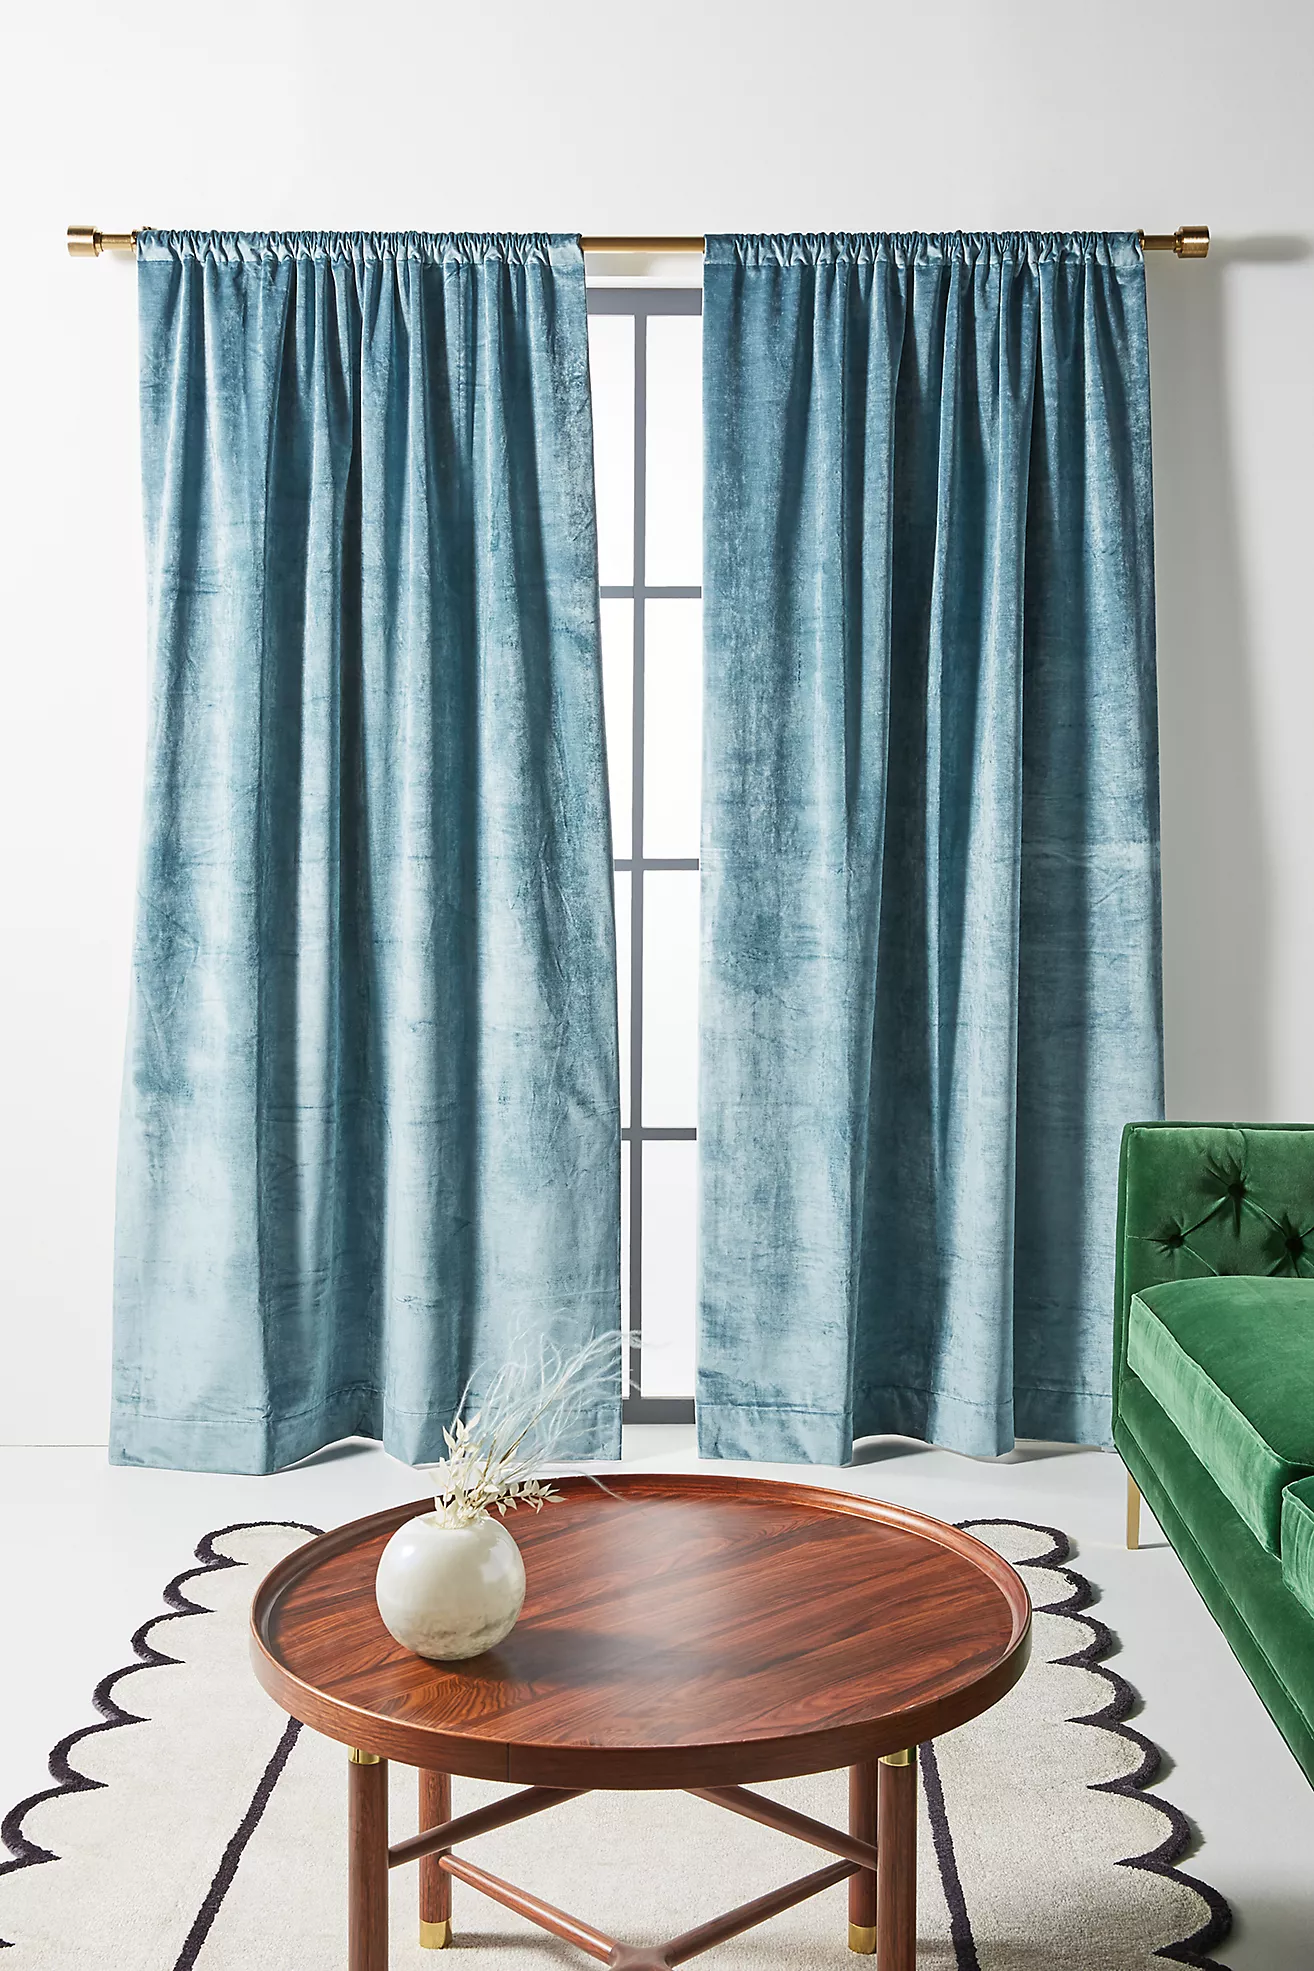 24 Blue Curtain Ideas For The Living Room, Teal Green Curtains For Living Room